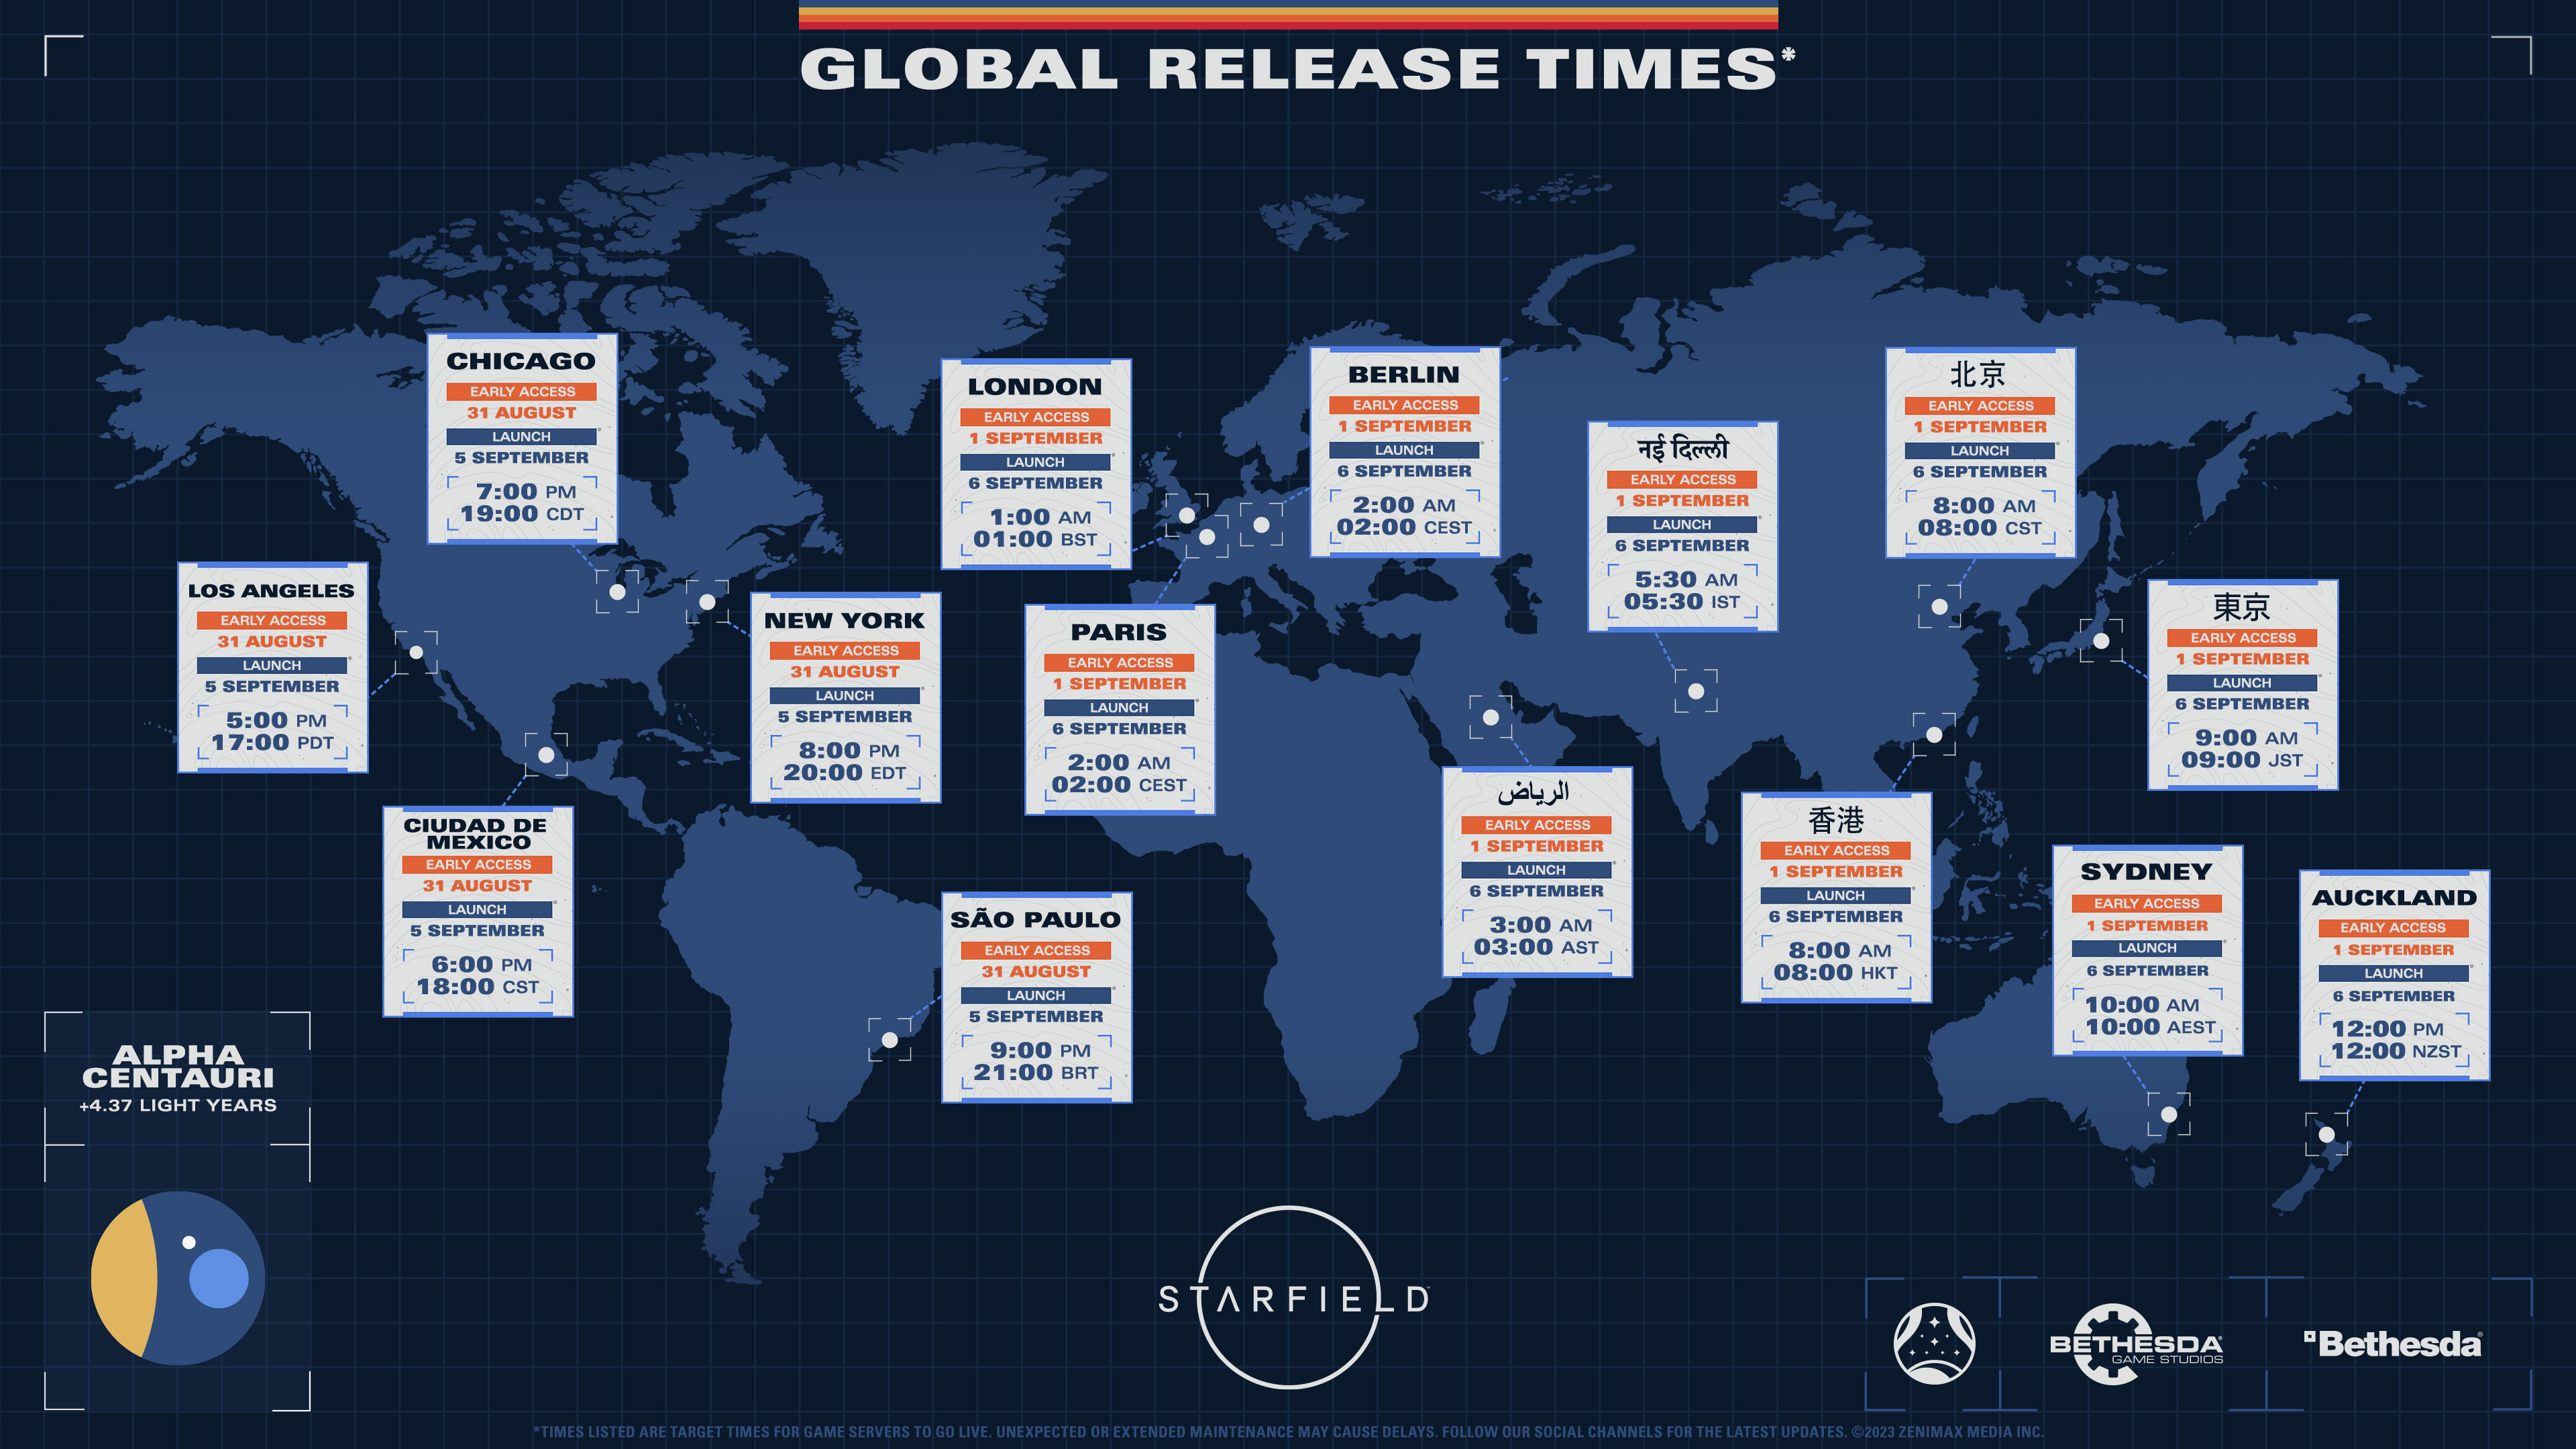 Image showing the release times for Starfield